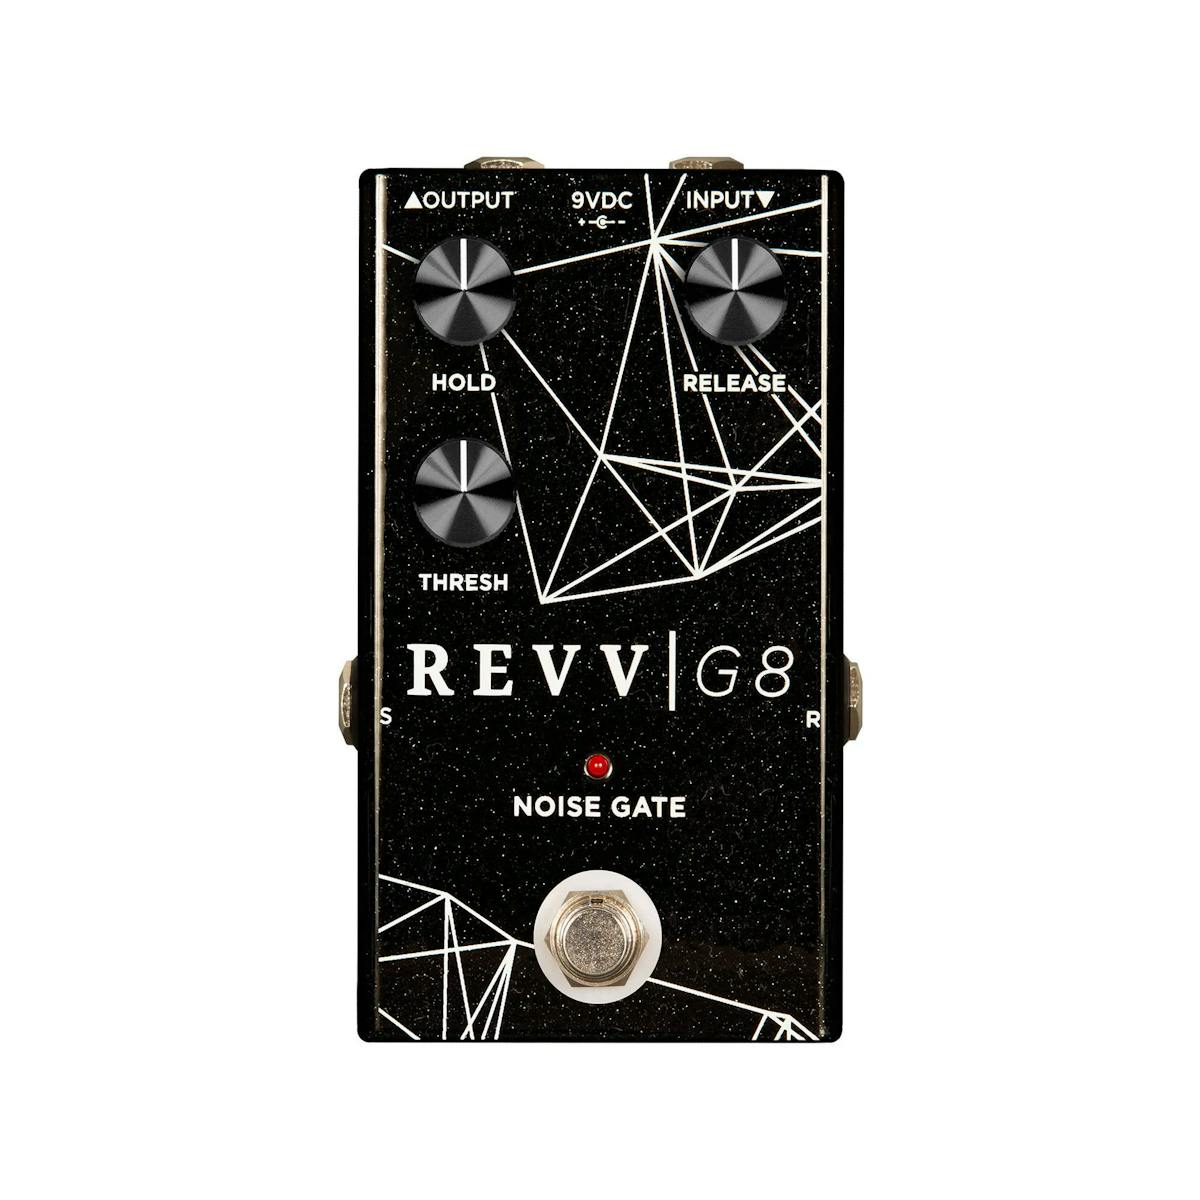 A Revv G8 noise gate pedal on a white background.